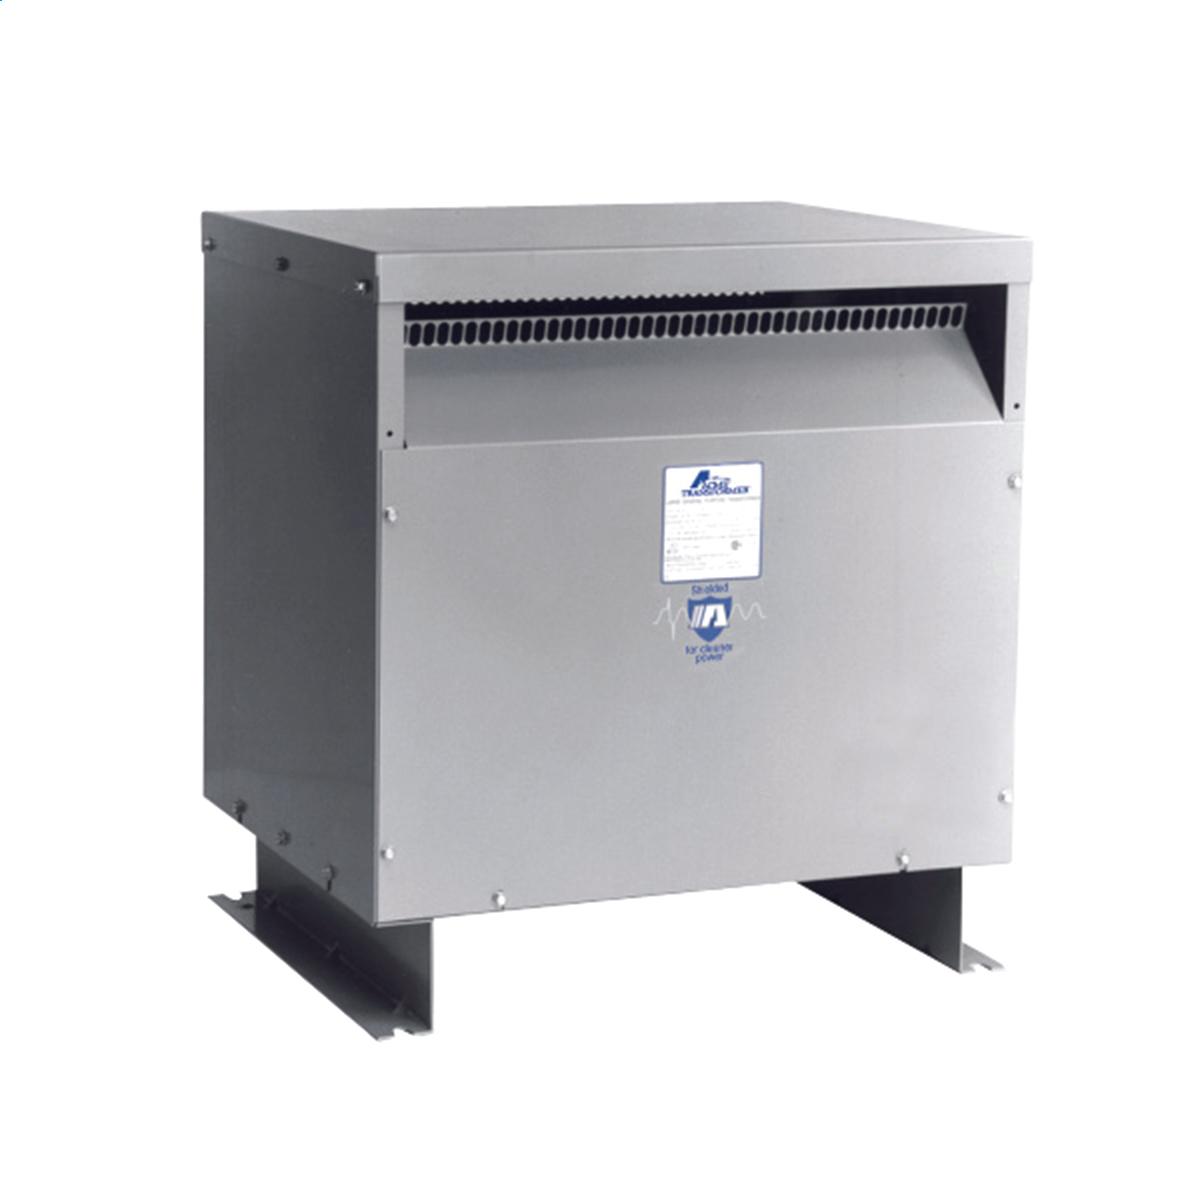 Hubbell WI045K13 Medium Voltage Transformer - Three Phase, 2400Δ - 480Y//277V, 45kVA  ; Lower operating cost over Liquid-filled ; No additional fireproofing or venting ; Long life expectancy ; Smaller, lighter easy to maintain